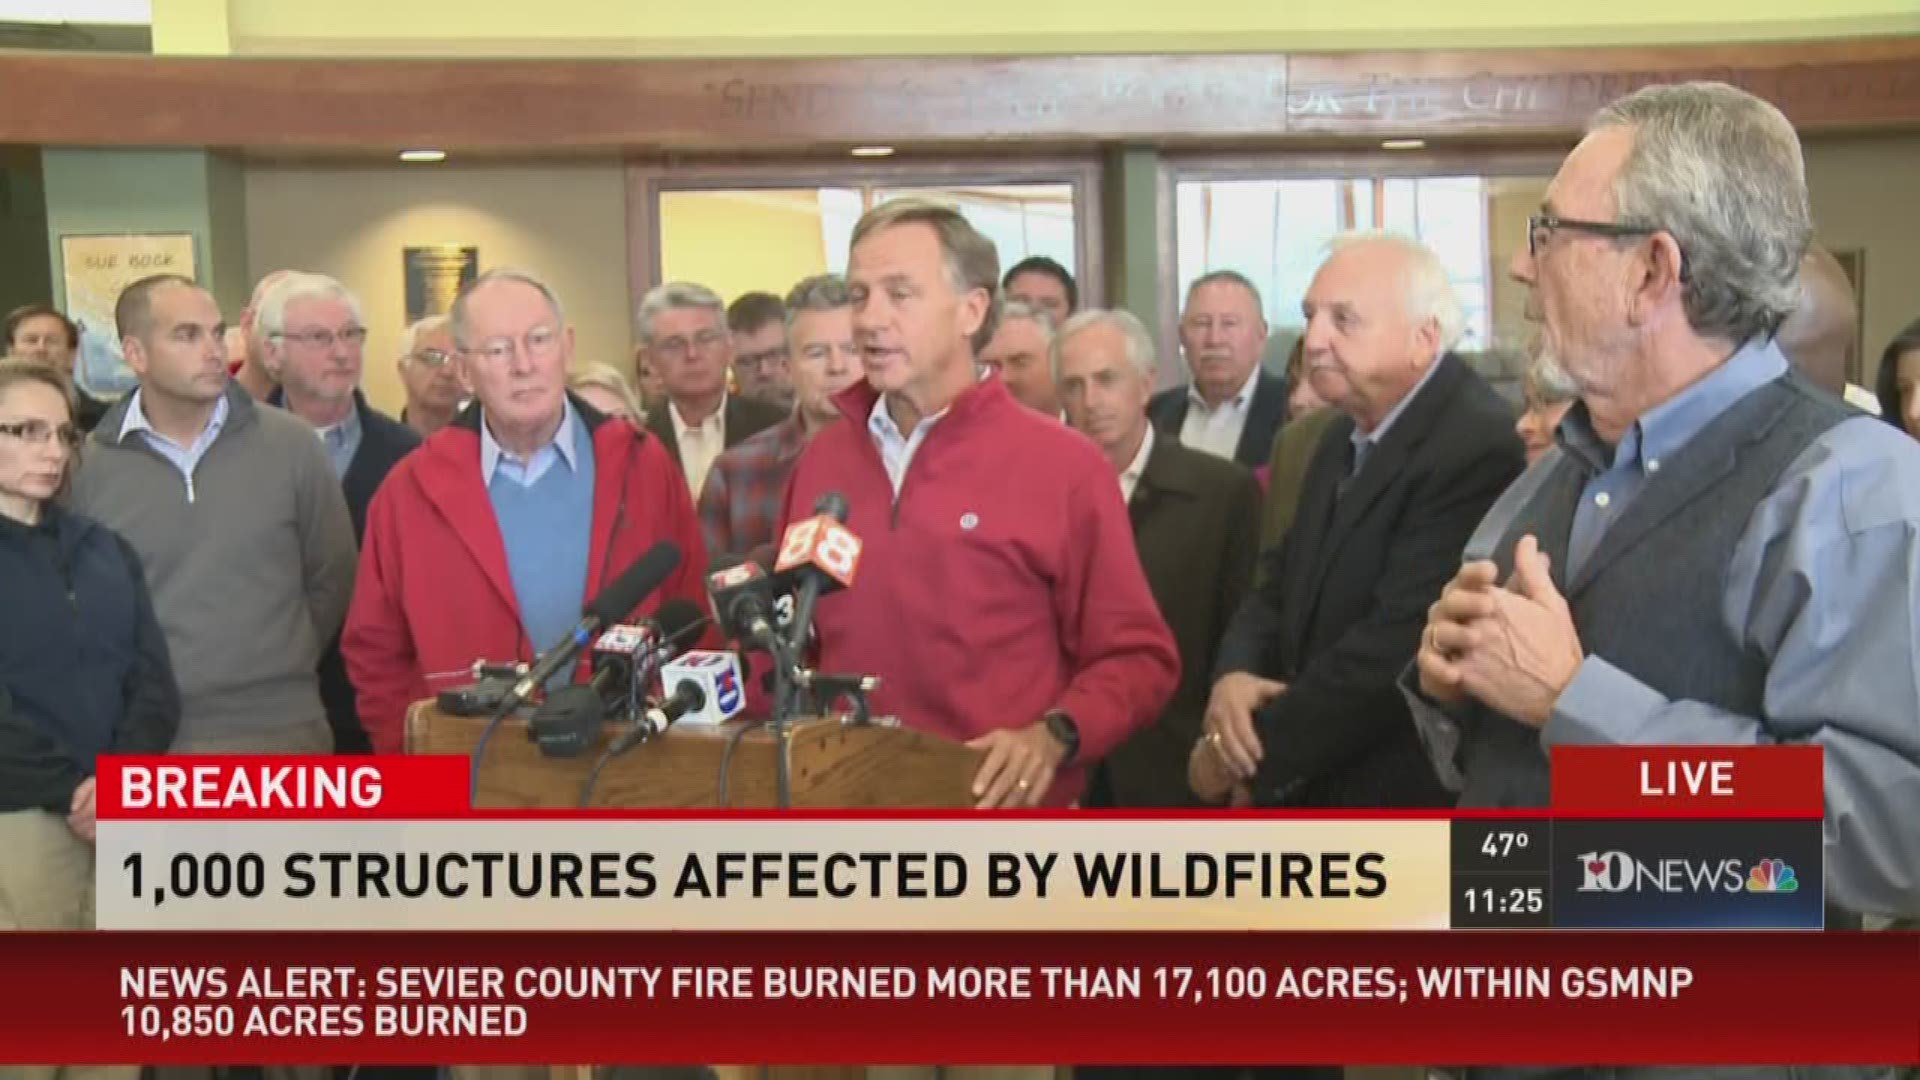 Local, state and federal lawmakers provided an update on the Sevier County wildfires at a news conference at an 11 a.m. on Friday, Dec. 2, 2016.